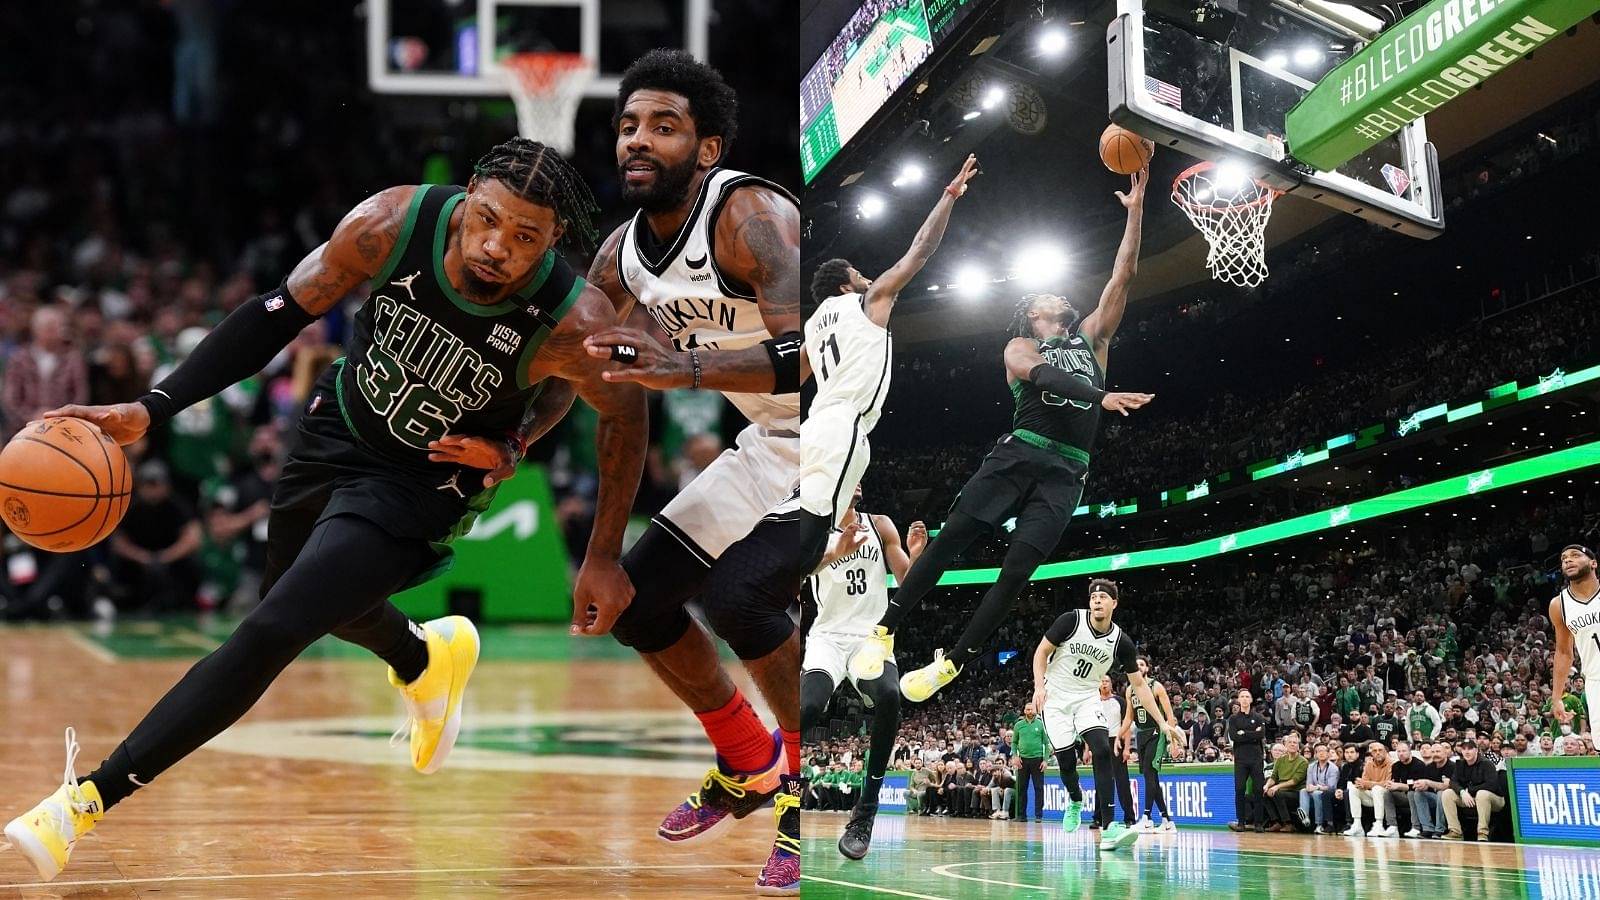 "We really got Jayson Tatum game winner and Marcus Smart DPOY within 24 hrs": NBA Twitter believes it is the best time to be a Boston Celtics fan in a long while